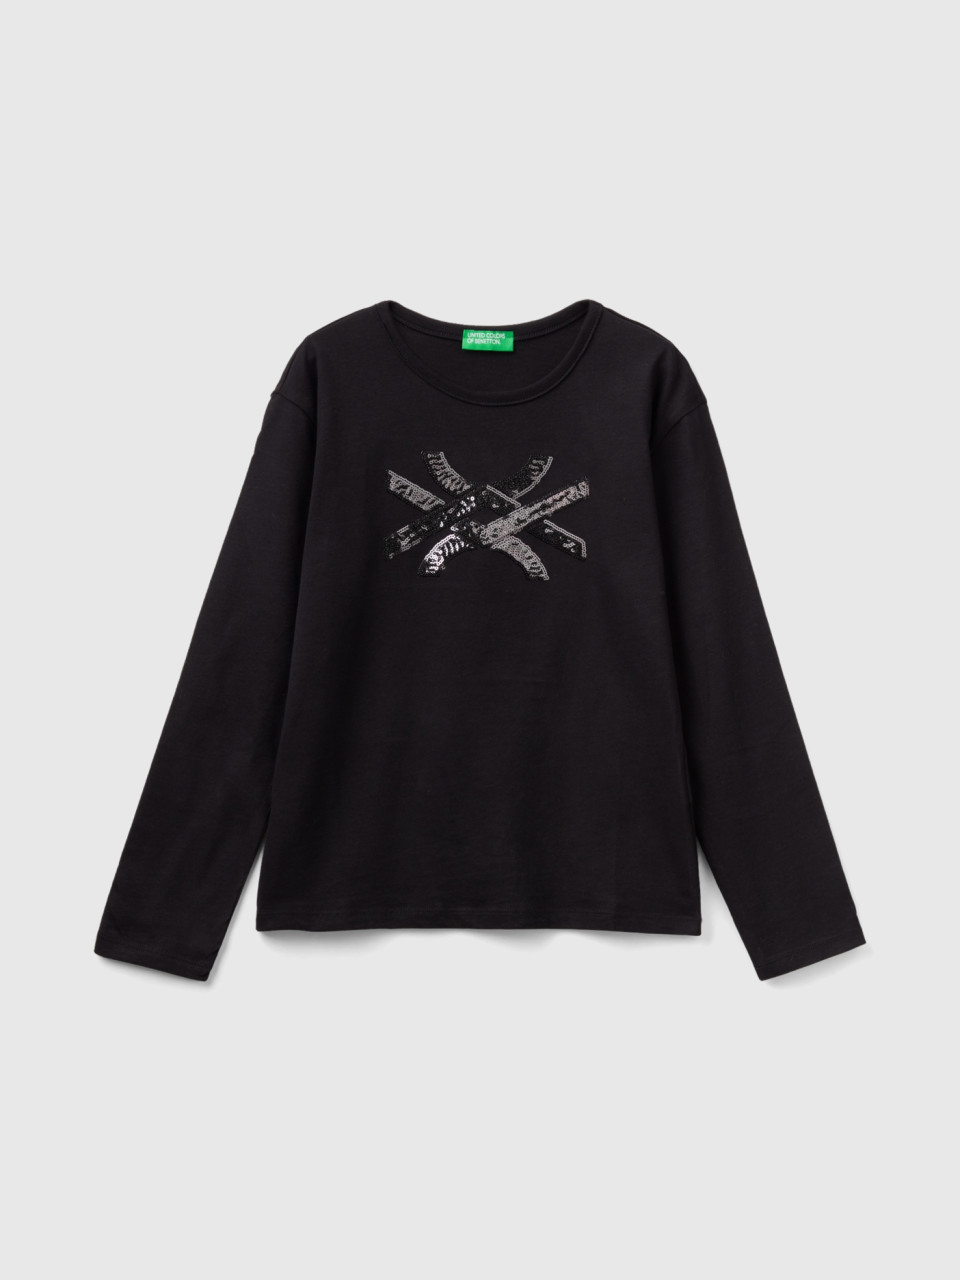 Benetton, T-shirt In Warm Organic Cotton With Sequins, Black, Kids